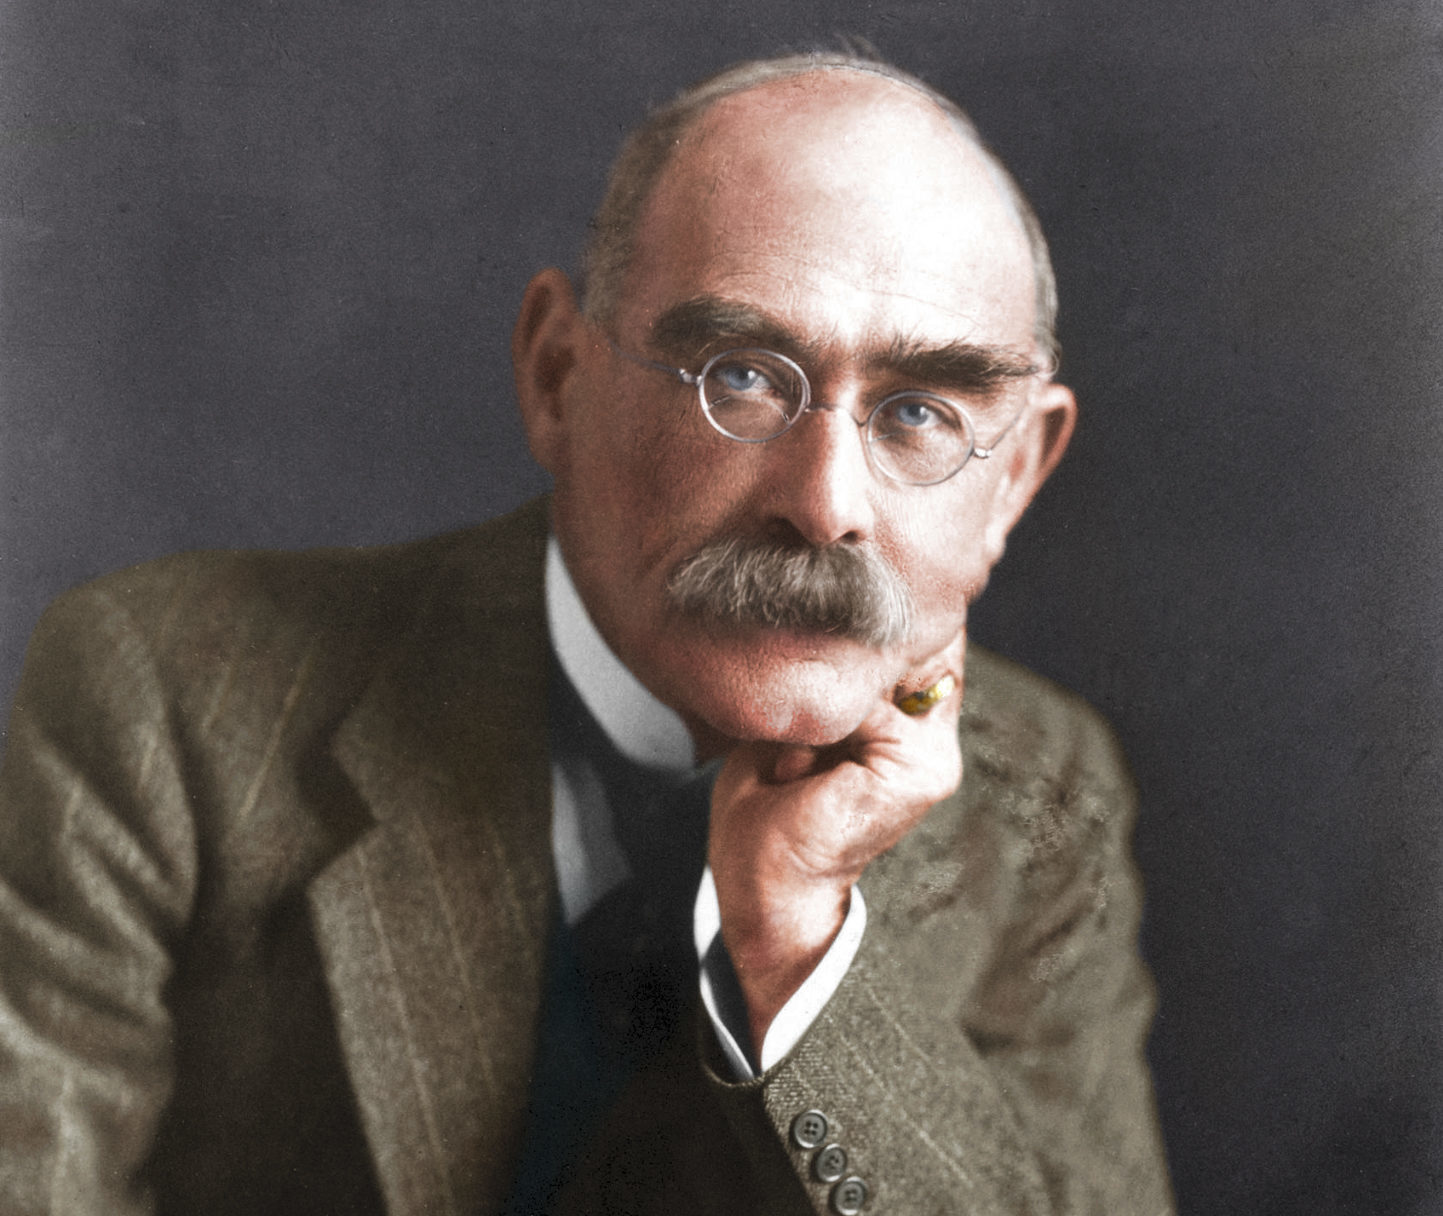 Rudyard Kipling “The Ballad of East and West” is Hardly Racist